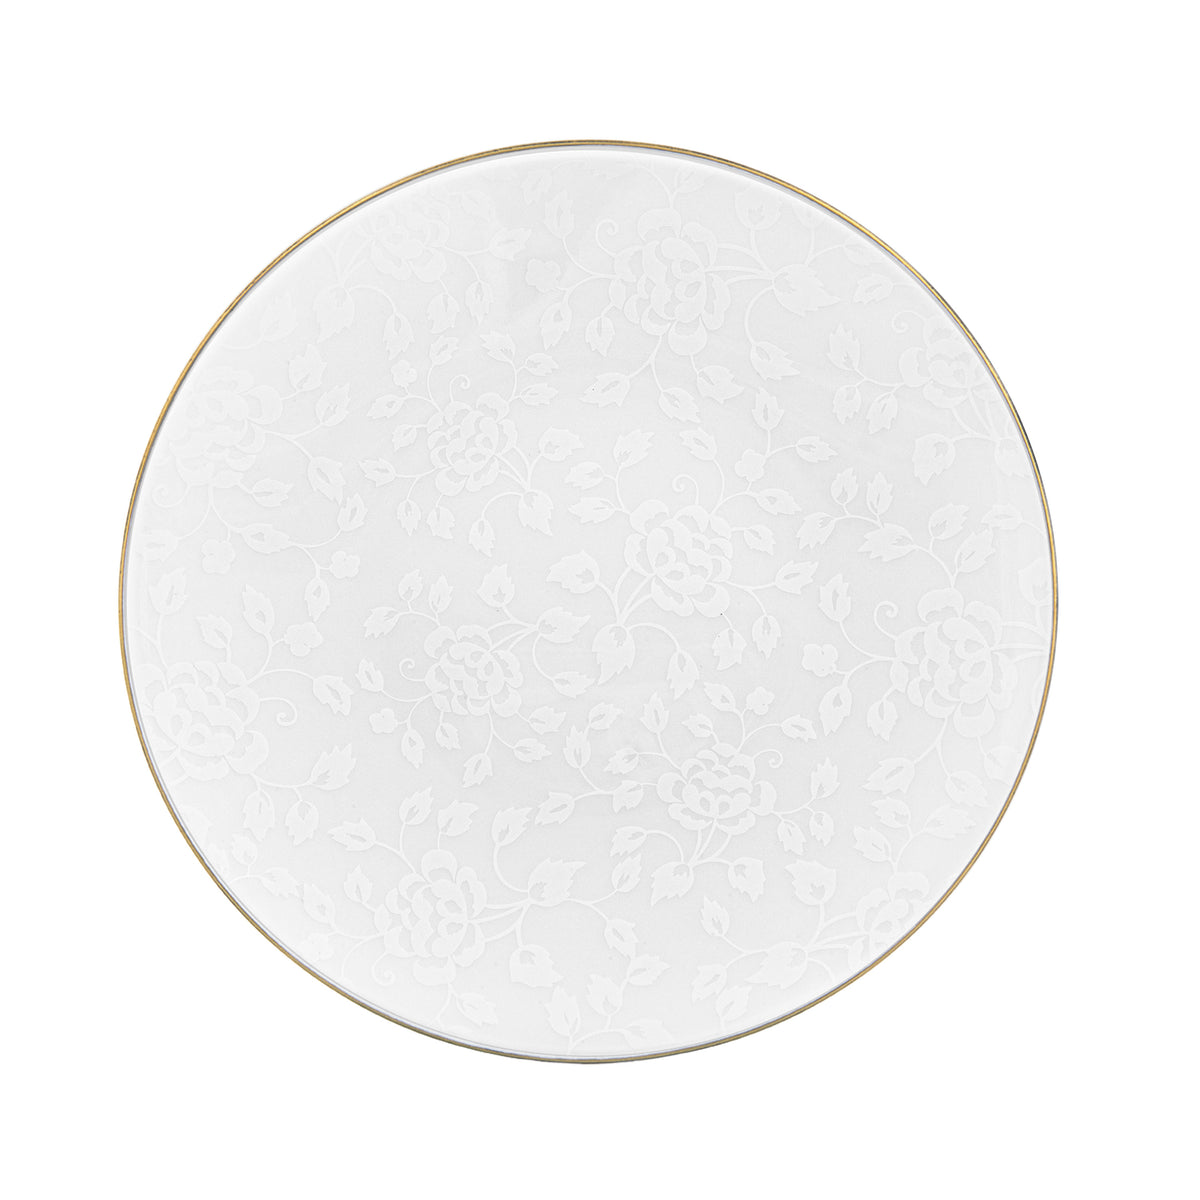 White on white thistles with gold thread - 29 cm plate